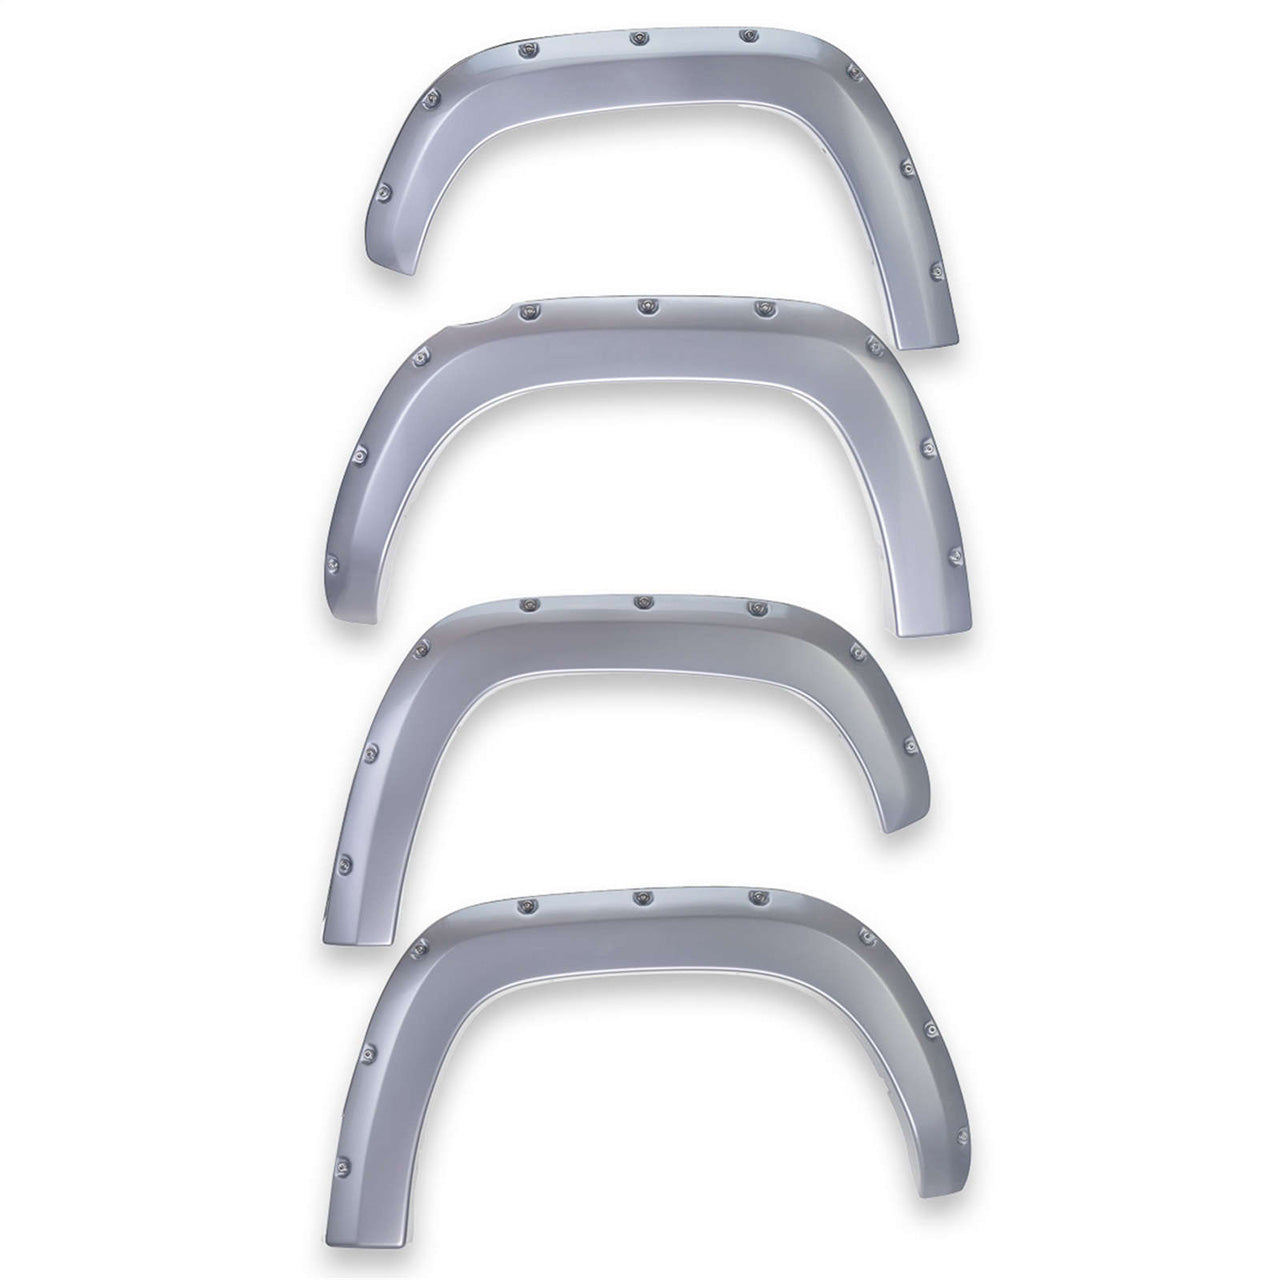 EGR Traditional Bolt-on look Fender Flares - 15-19 GMC Sierra 2500HD & 3500HD Painted to Code Silver Metallic set of 4